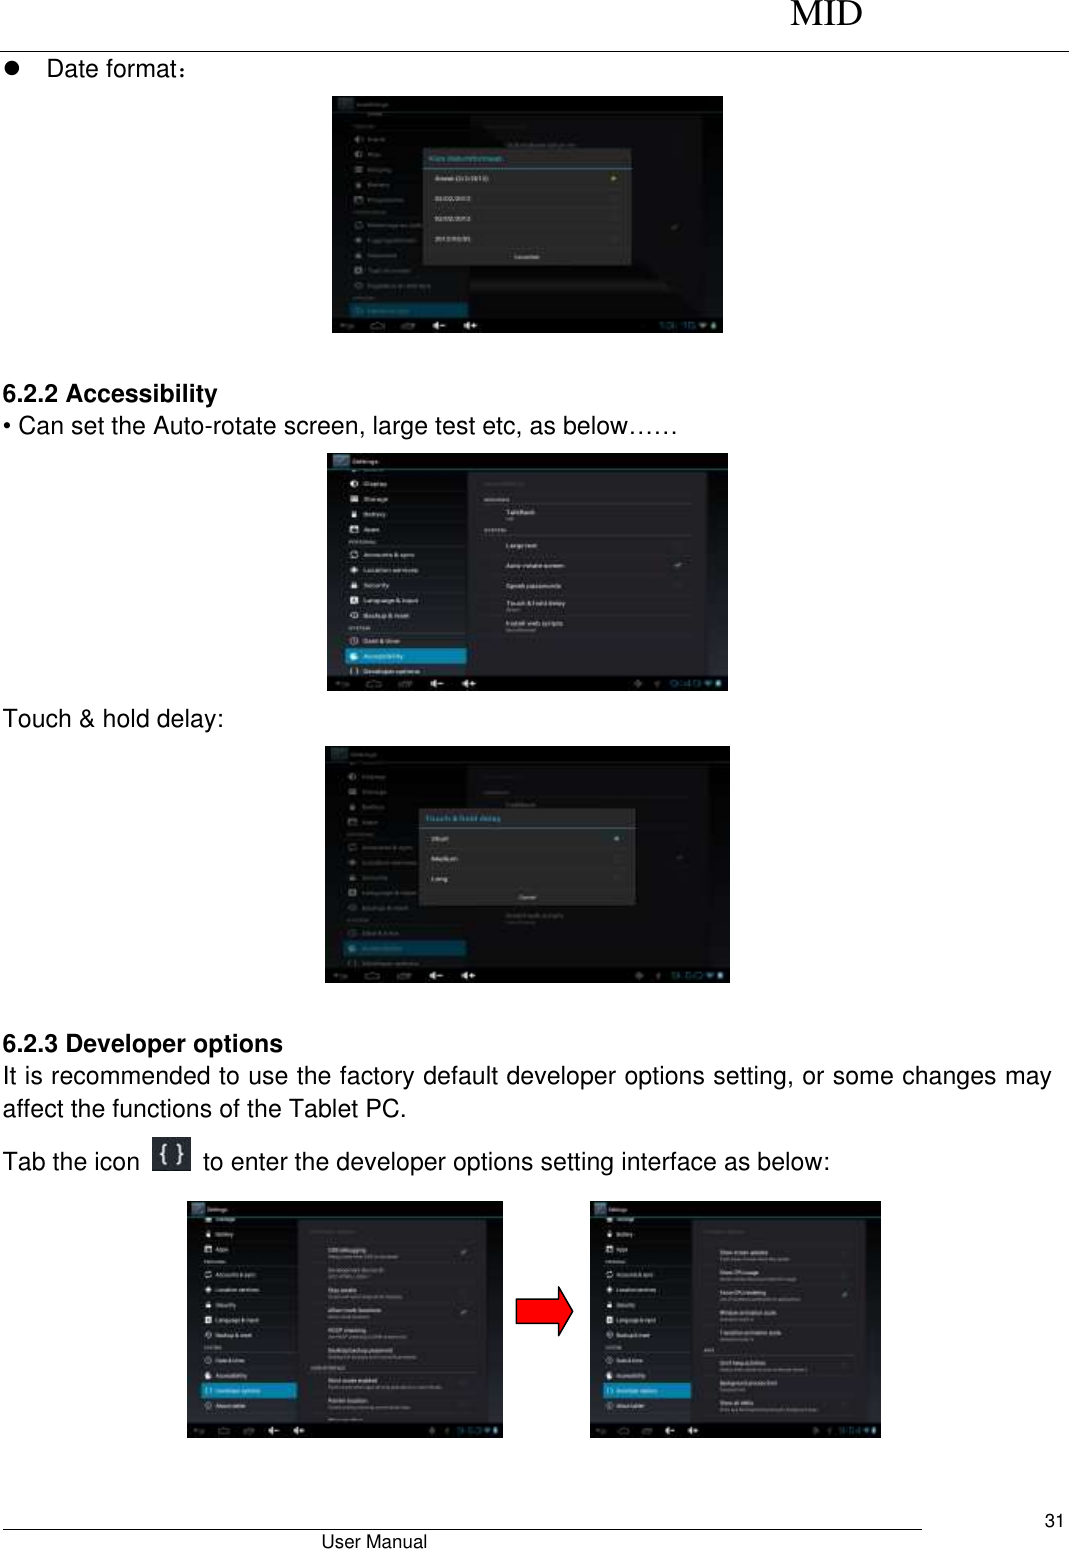      MID                                        User Manual     31   Date format：   6.2.2 Accessibility • Can set the Auto-rotate screen, large test etc, as below……  Touch &amp; hold delay:   6.2.3 Developer options It is recommended to use the factory default developer options setting, or some changes may affect the functions of the Tablet PC. Tab the icon    to enter the developer options setting interface as below:           